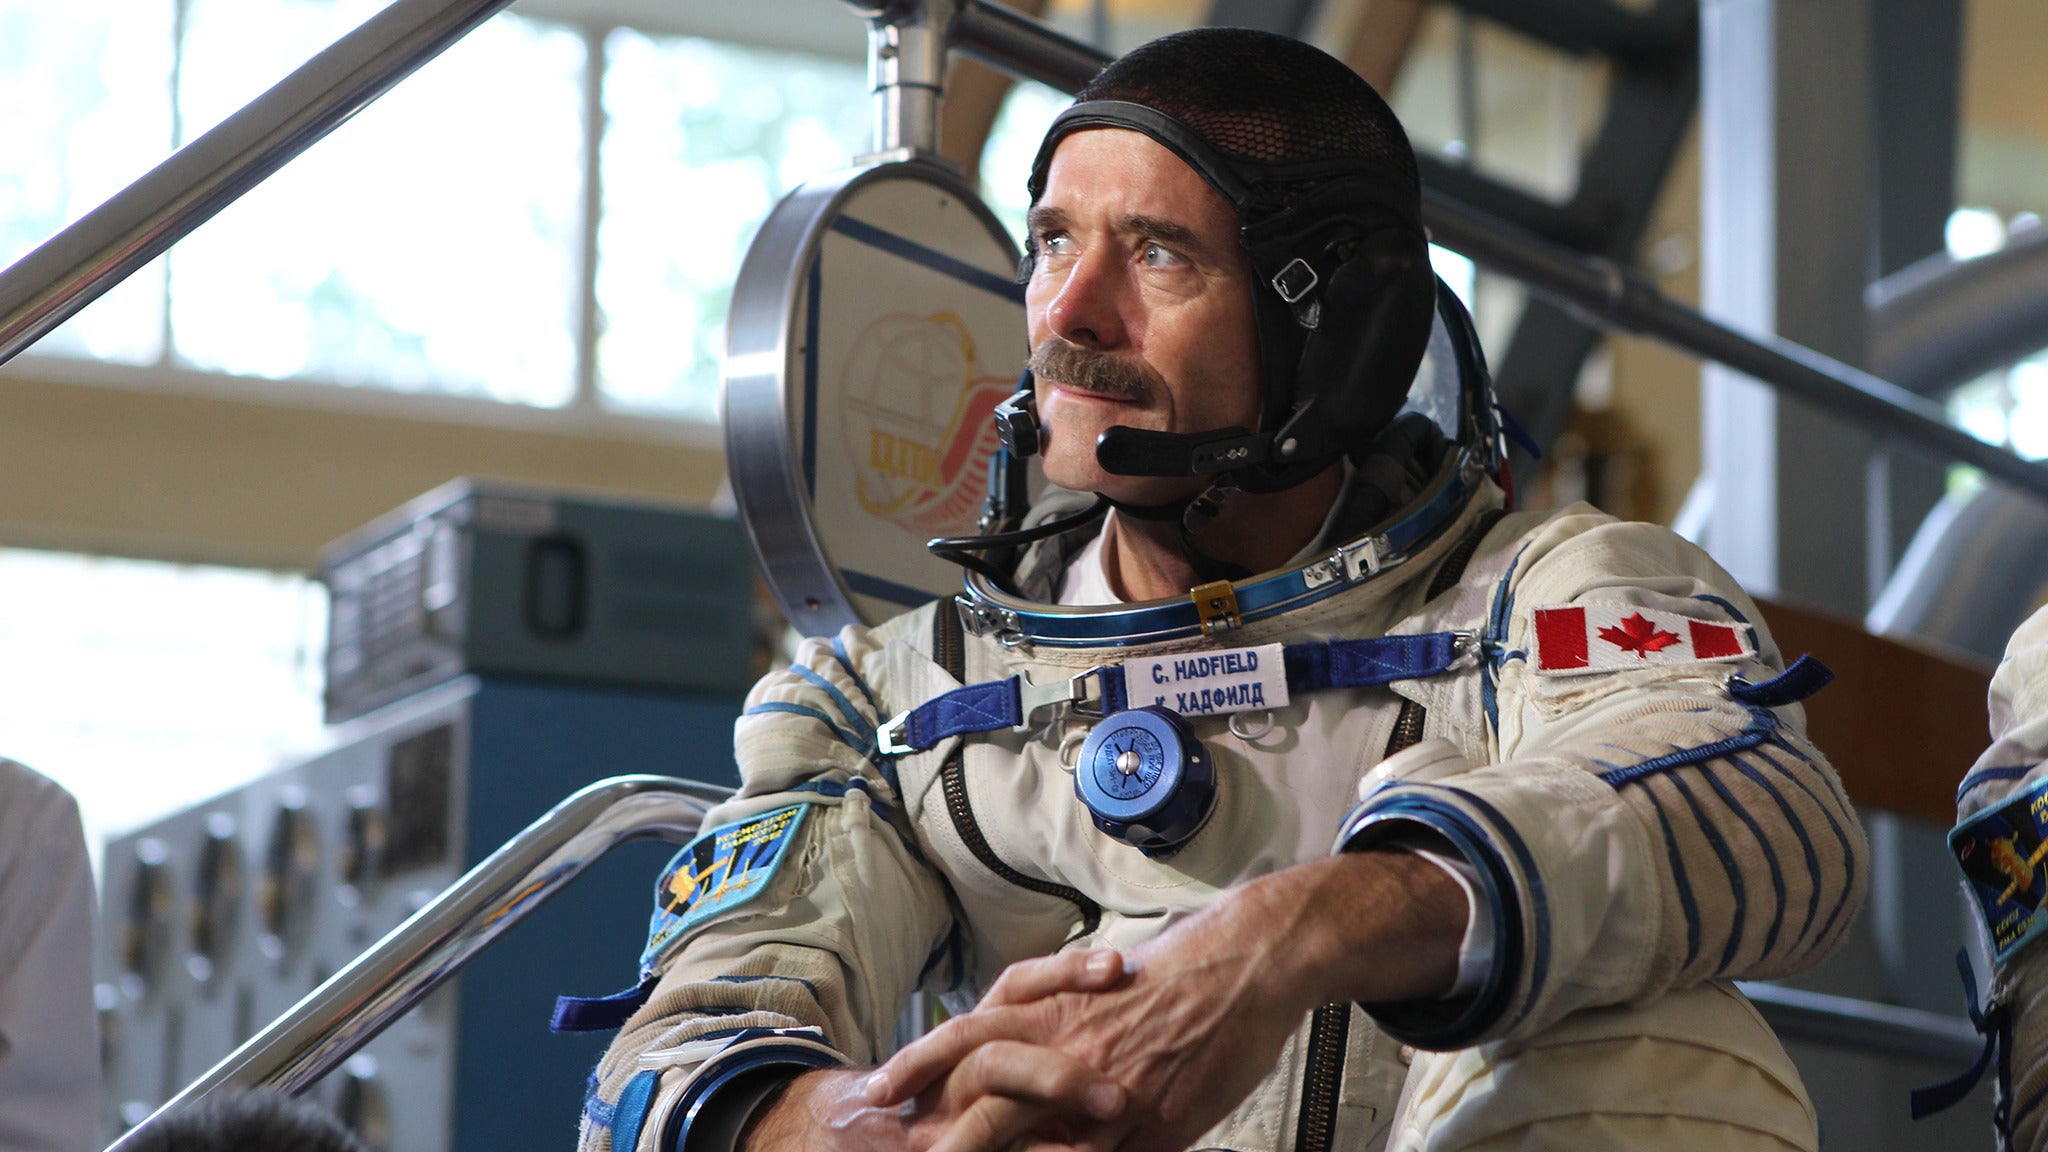 Chris Hadfield VIP Upgrade (No Ticket Included) in Edmonton promo photo for VIP Package presale offer code